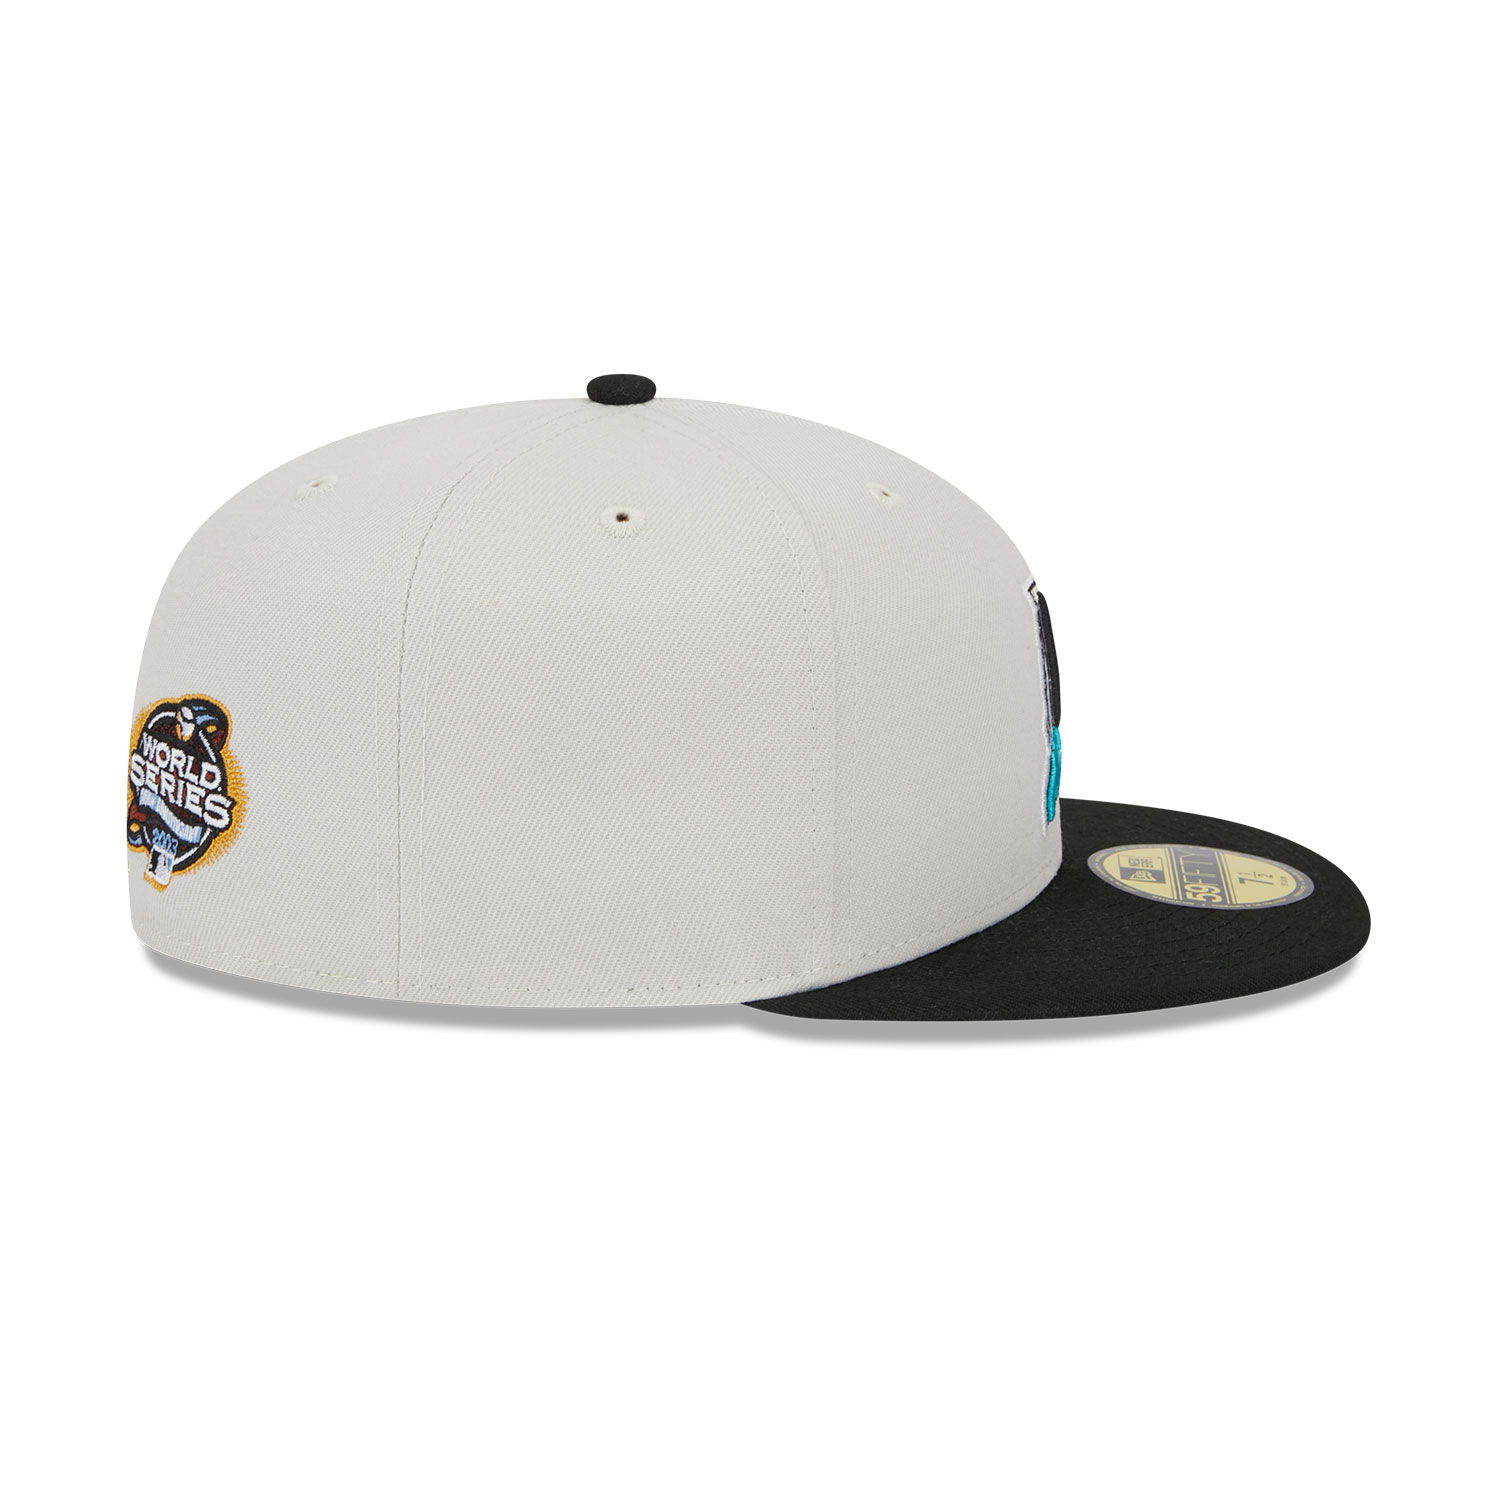 Miami Marlins Varsity Letter Stone 59FIFTY Fitted Cap